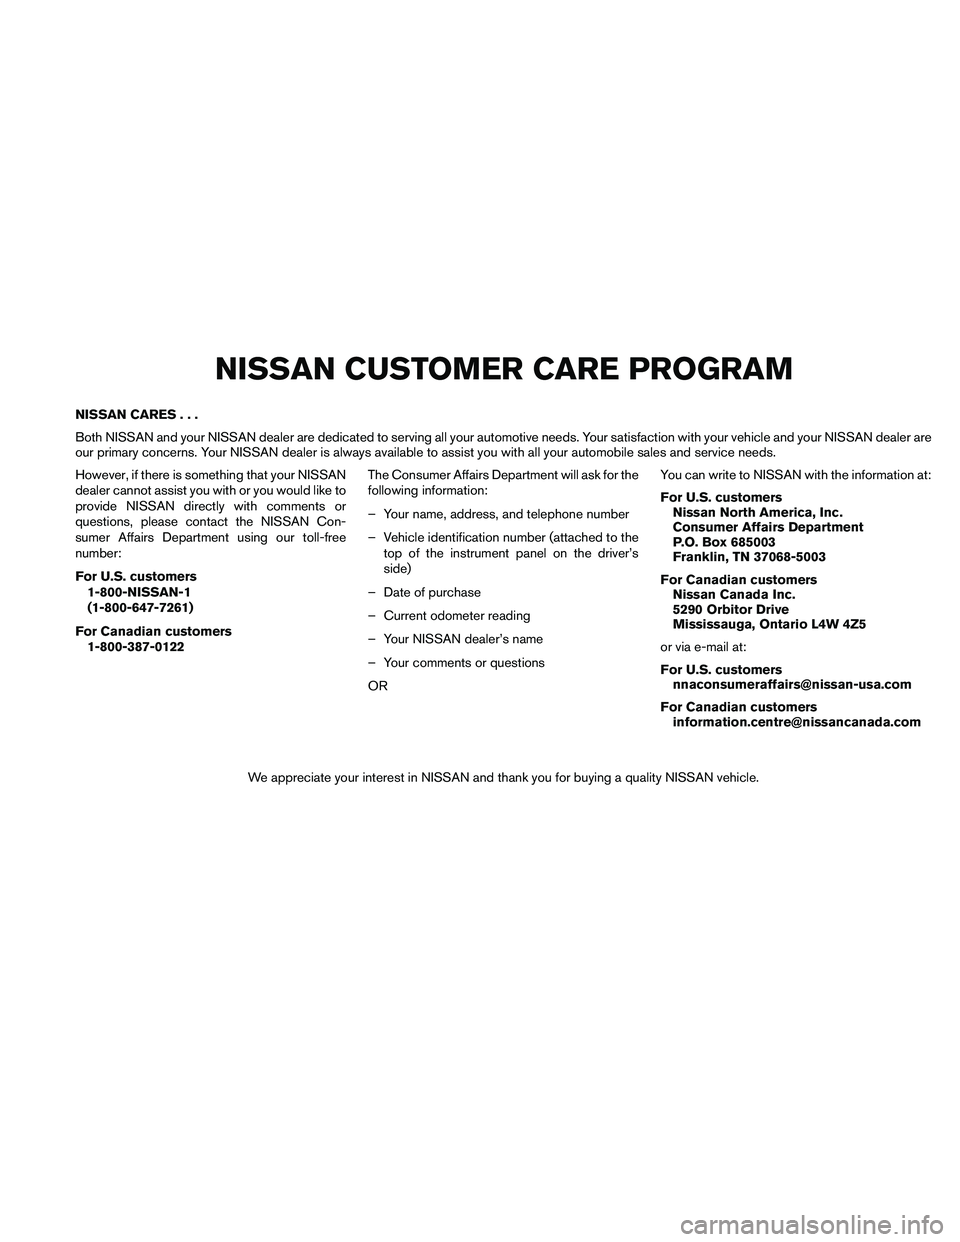 NISSAN PATHFINDER 2011  Owner´s Manual NISSAN CARES...
Both NISSAN and your NISSAN dealer are dedicated to serving all your automotive needs. Your satisfaction with your vehicle and your NISSAN dealer are
our primary concerns. Your NISSAN 